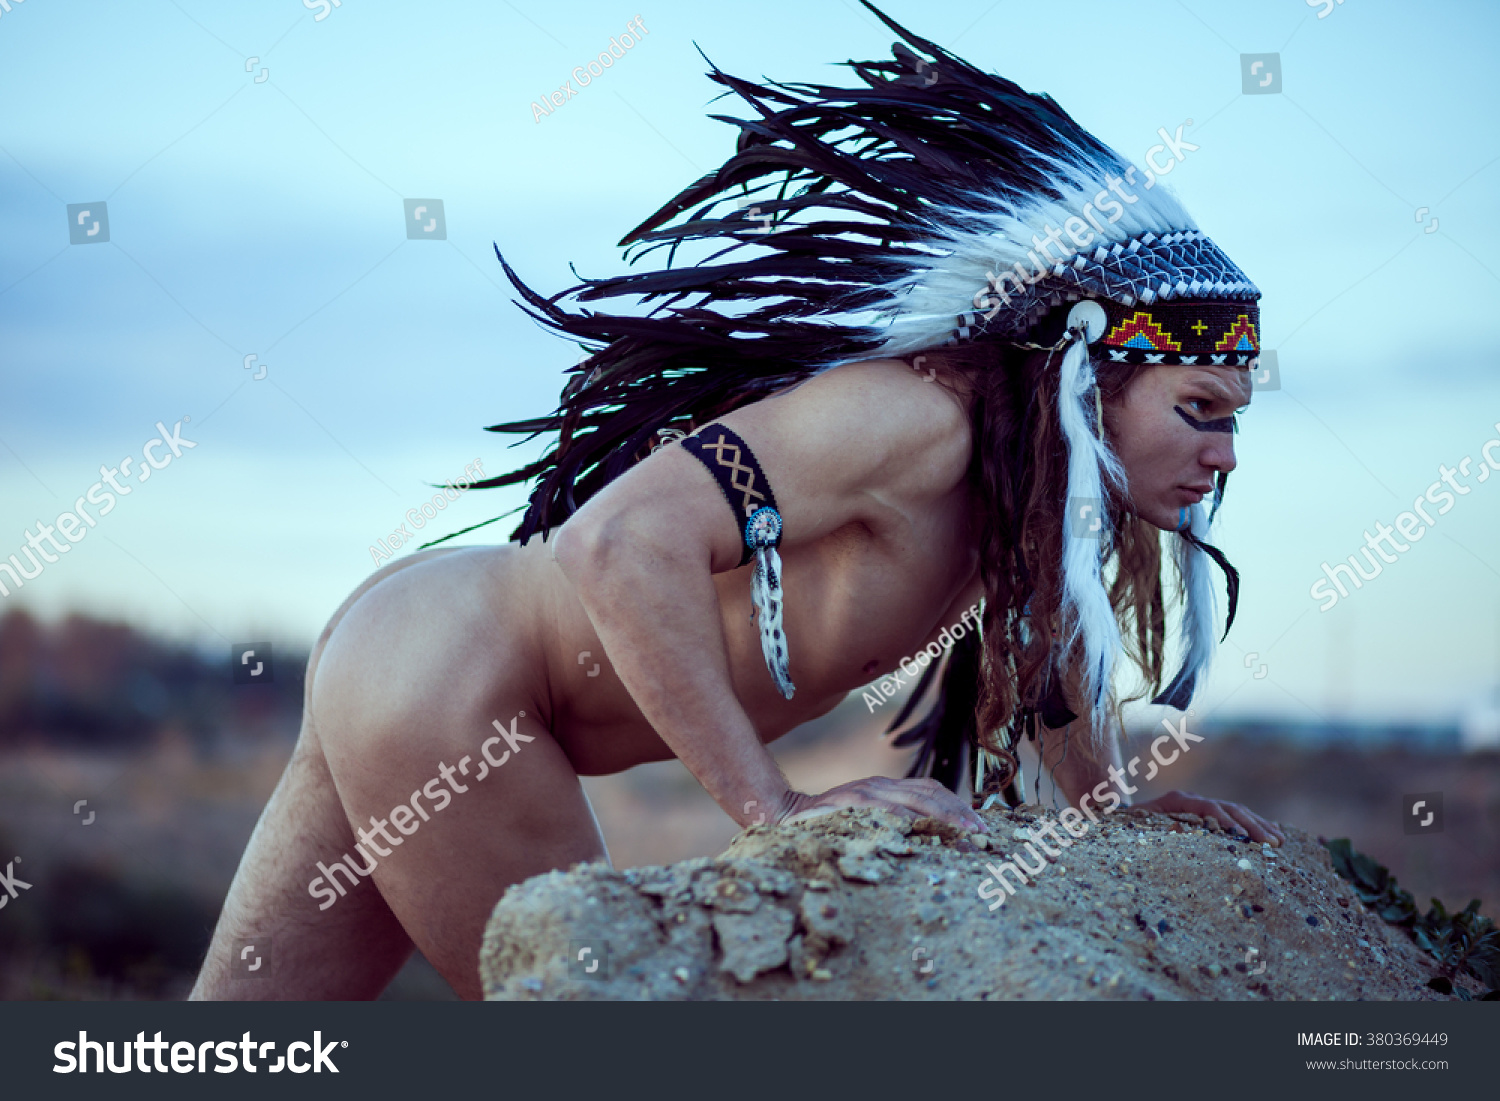 768 Naked Native American Images, Stock Photos & Vectors